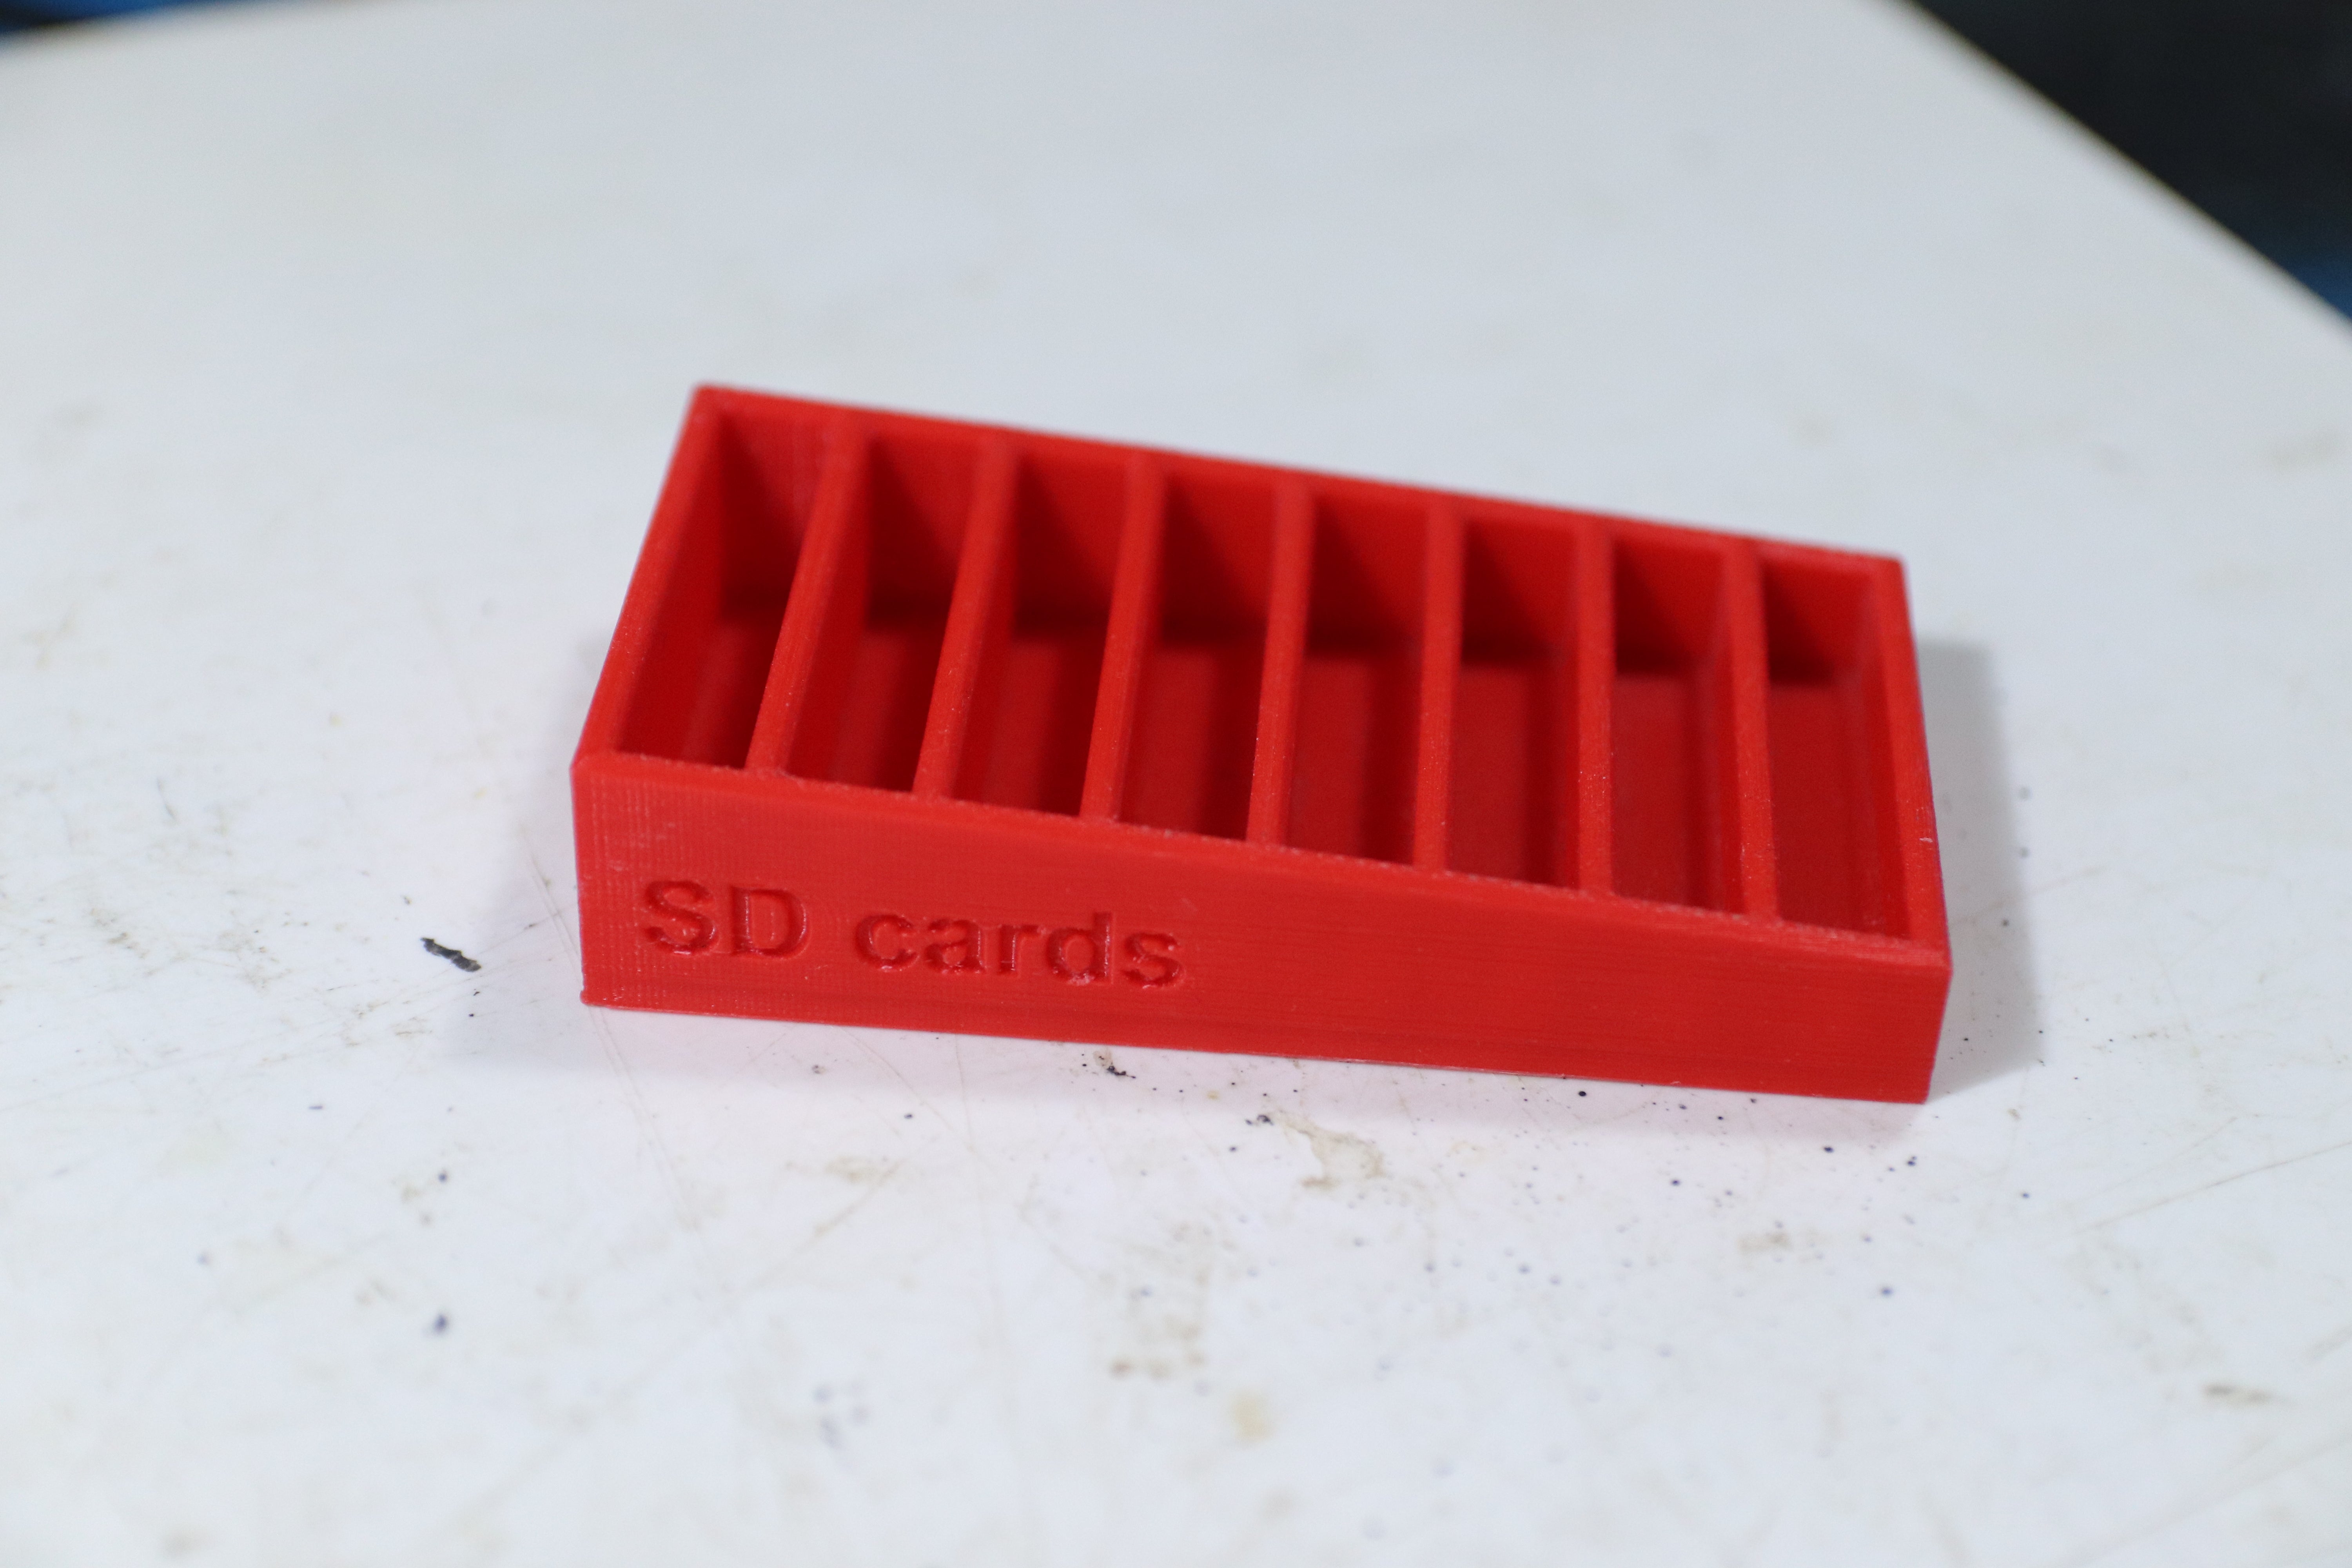 SD cards holder (casing on)